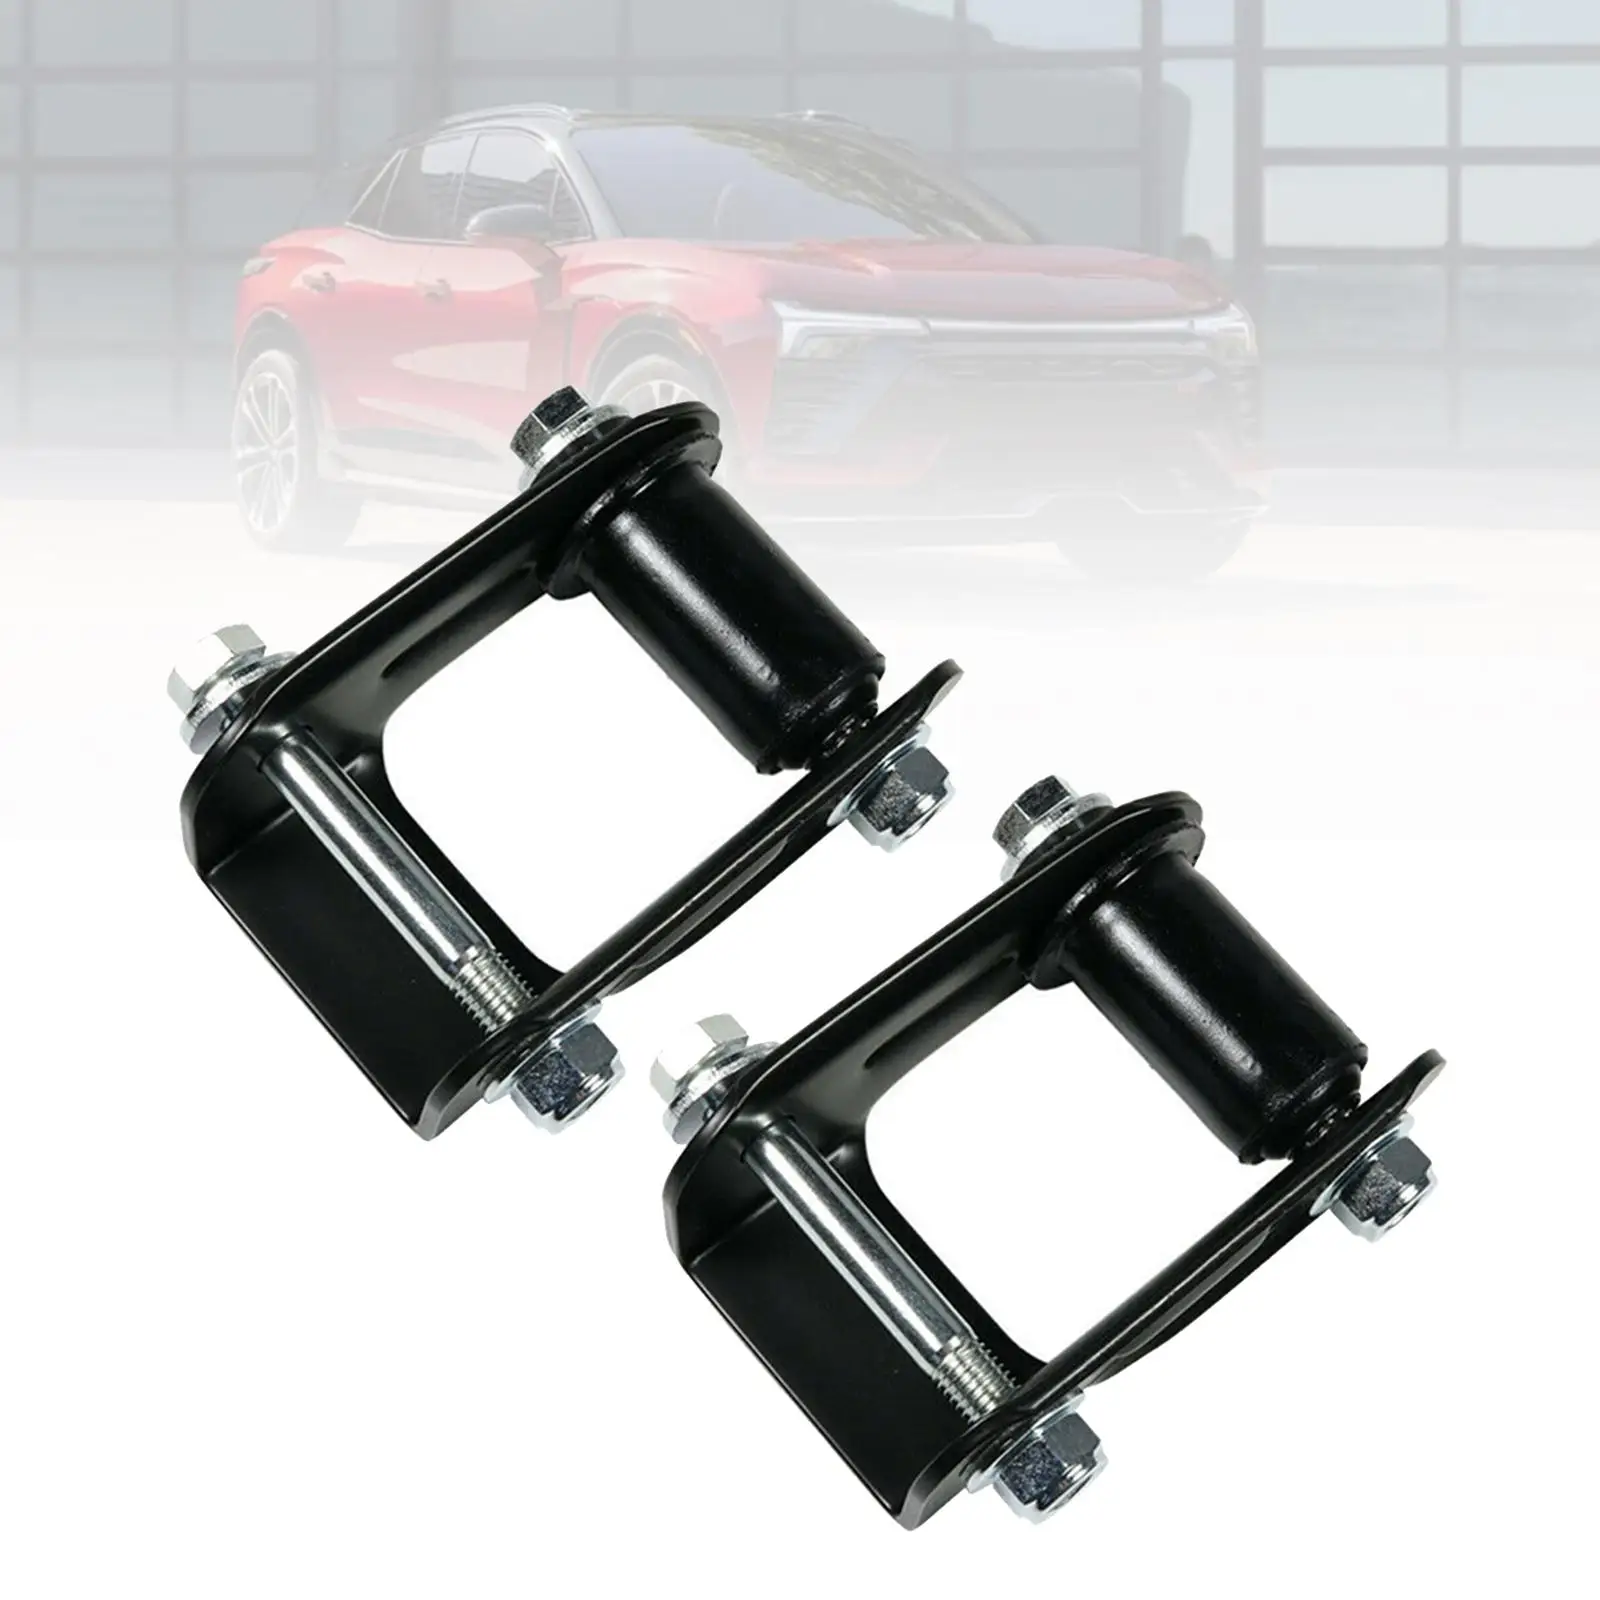 2 Pieces Leaf Spring Shackle Kit Professional Water Resistant Glossy Appearance Replaces for Chevrolet Blazer S10 Pickup